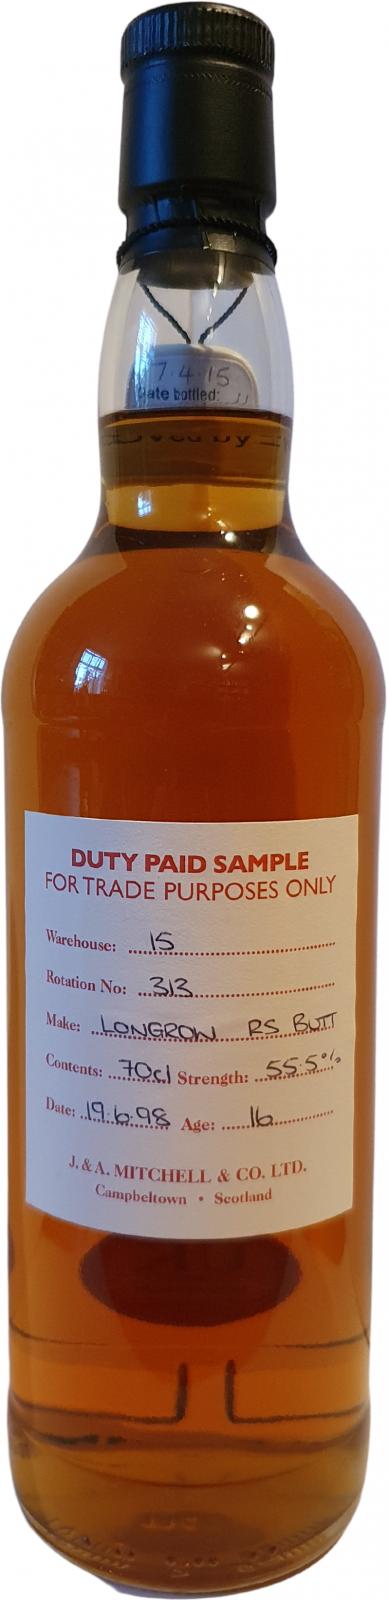 Longrow 1998 Duty Paid Sample For Trade Purposes Only Refill sherry butt Rotation 313 55.5% 700ml